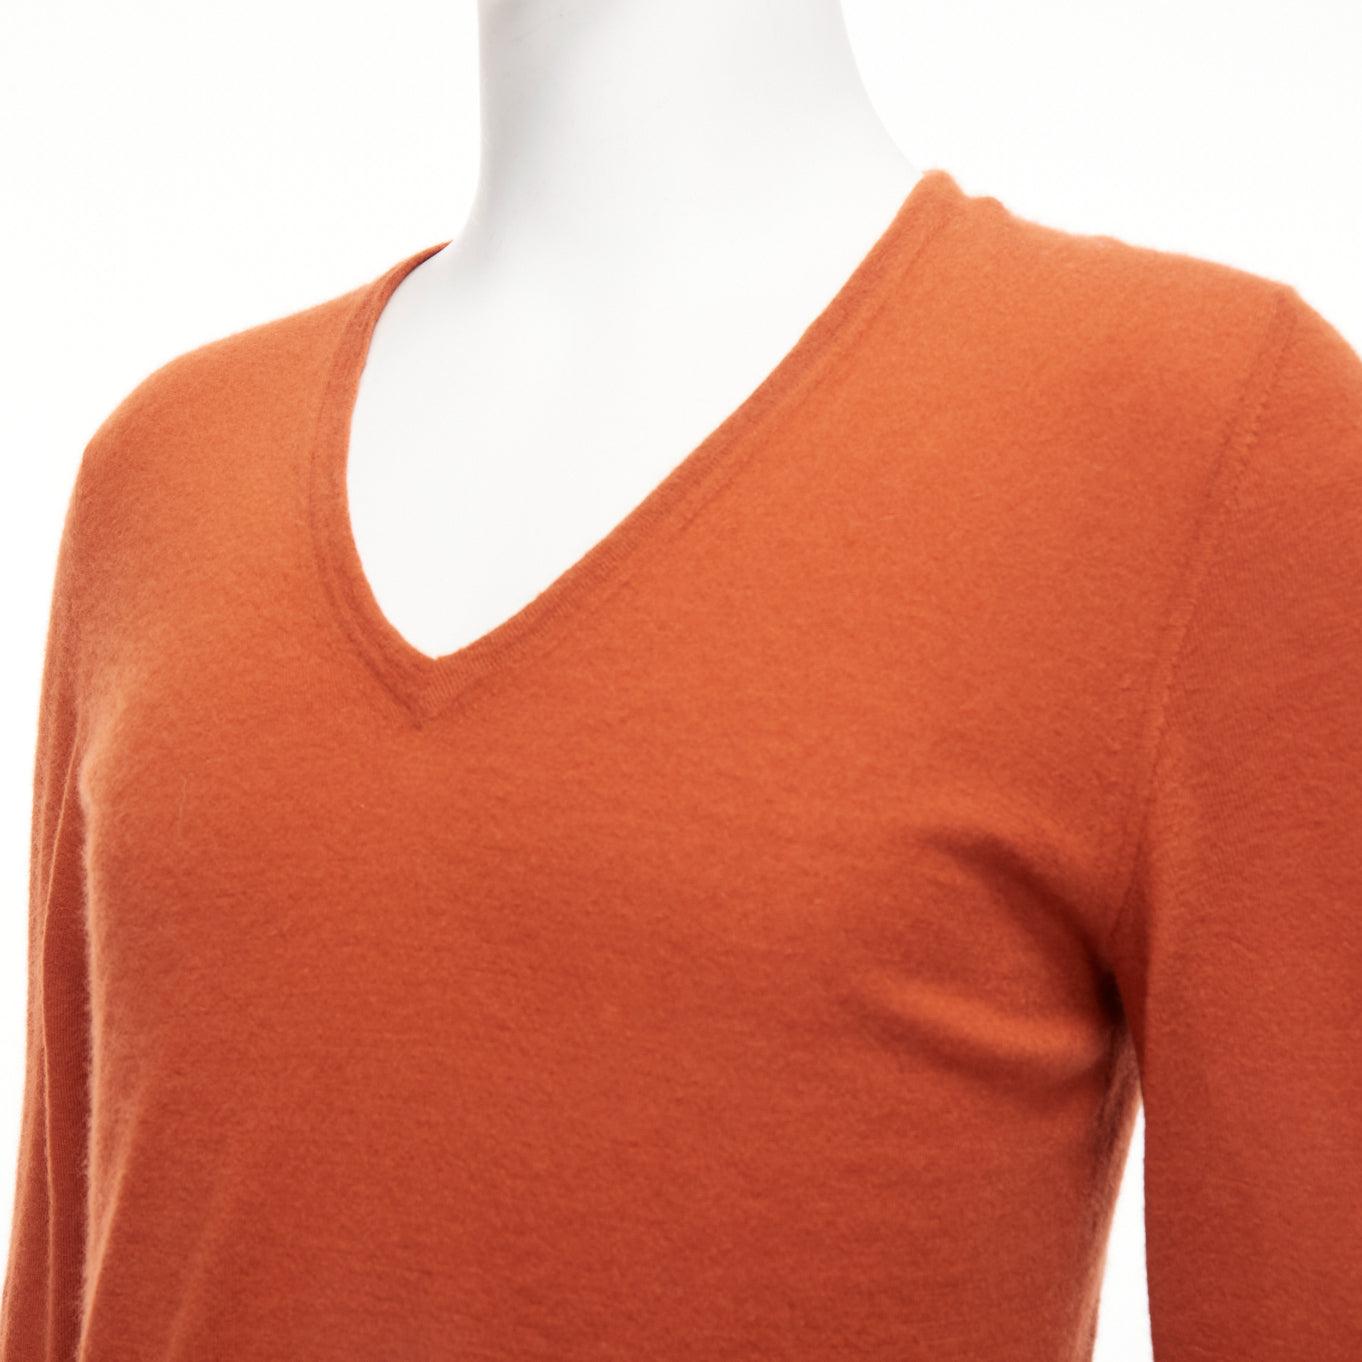 GUCCI Vintage 100% cashmere rust orange V-neck long sleeve sweater L
Reference: JSLE/A00118
Brand: Gucci
Material: Cashmere
Color: Orange
Pattern: Solid
Closure: Pullover
Made in: Italy

CONDITION:
Condition: Excellent, this item was pre-owned and